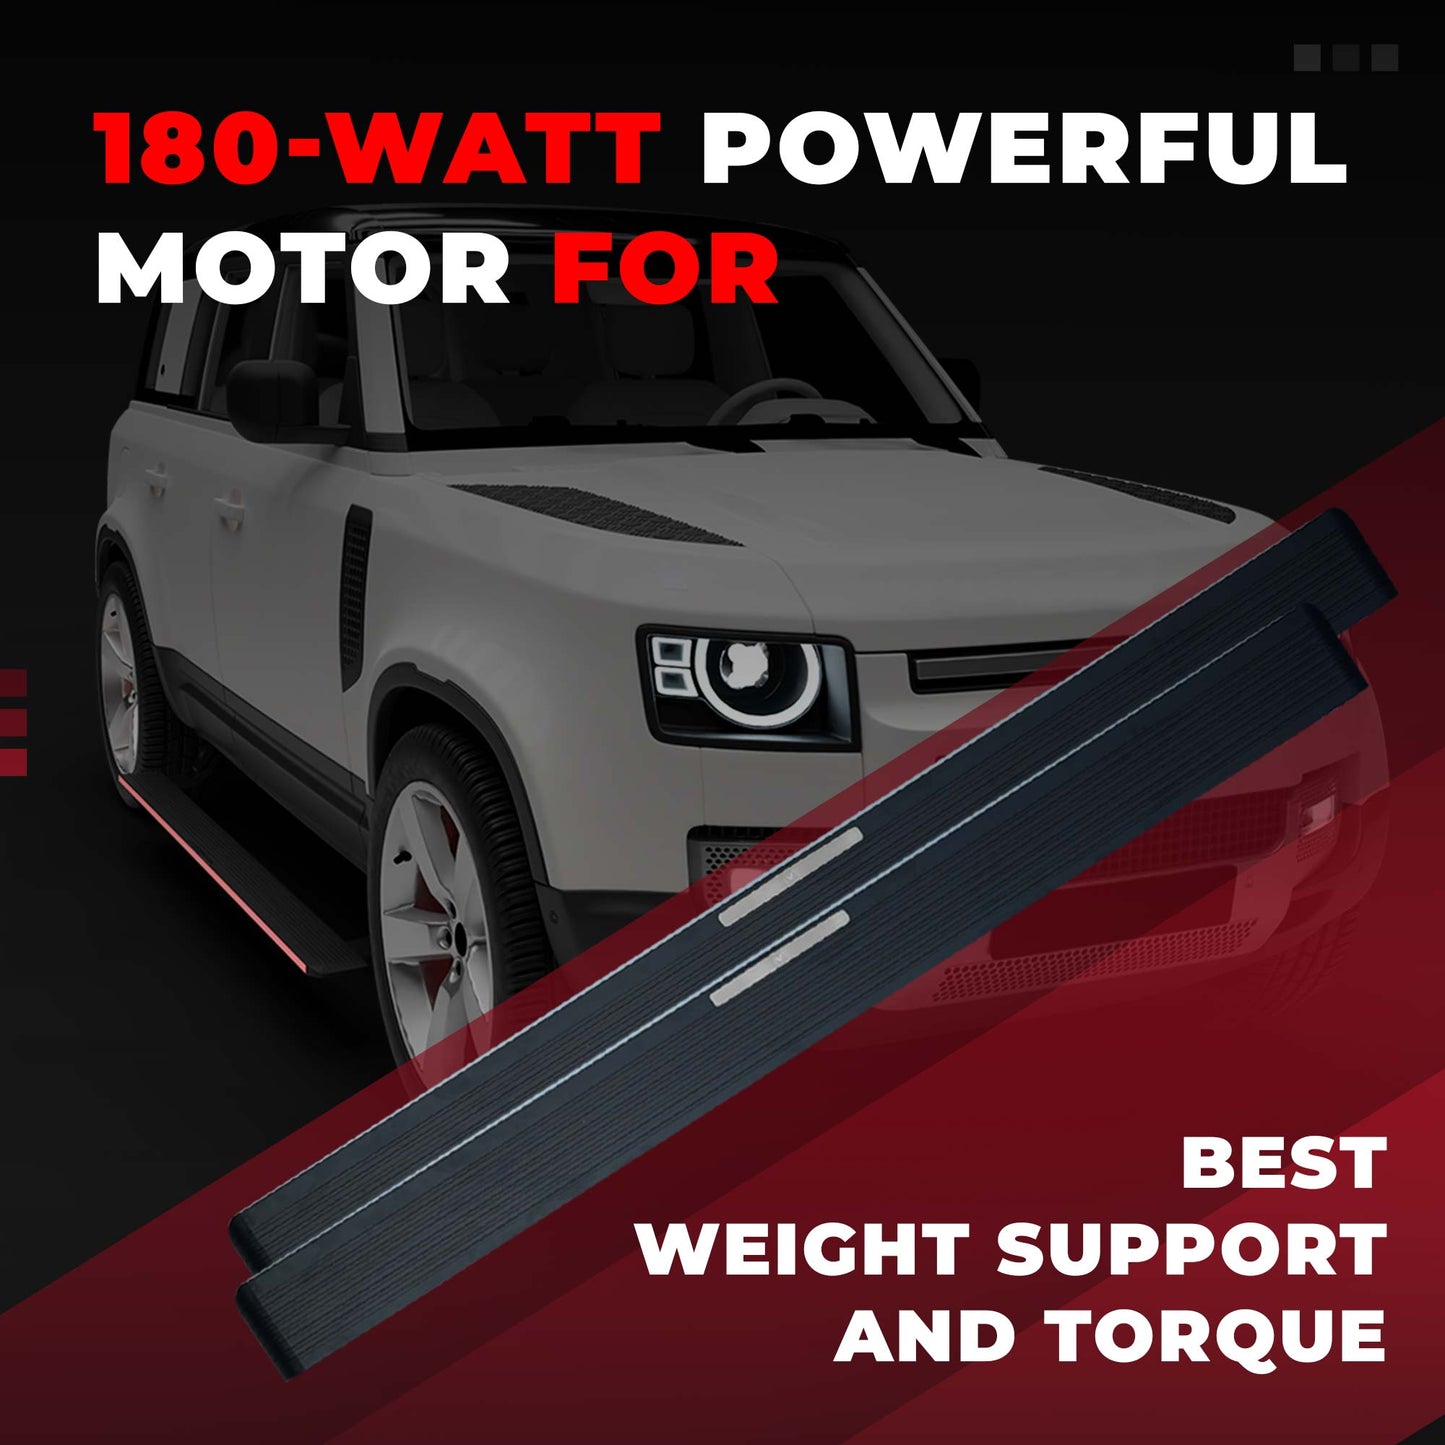 JCBL Accessories Automatic Door Side E-Step for SUVs ( Land Rover Defender 23+ E-Side Step) |180-WATT POWERFUL MOTOR FOR BEST WEIGHT SUPPORT AND TORQUE